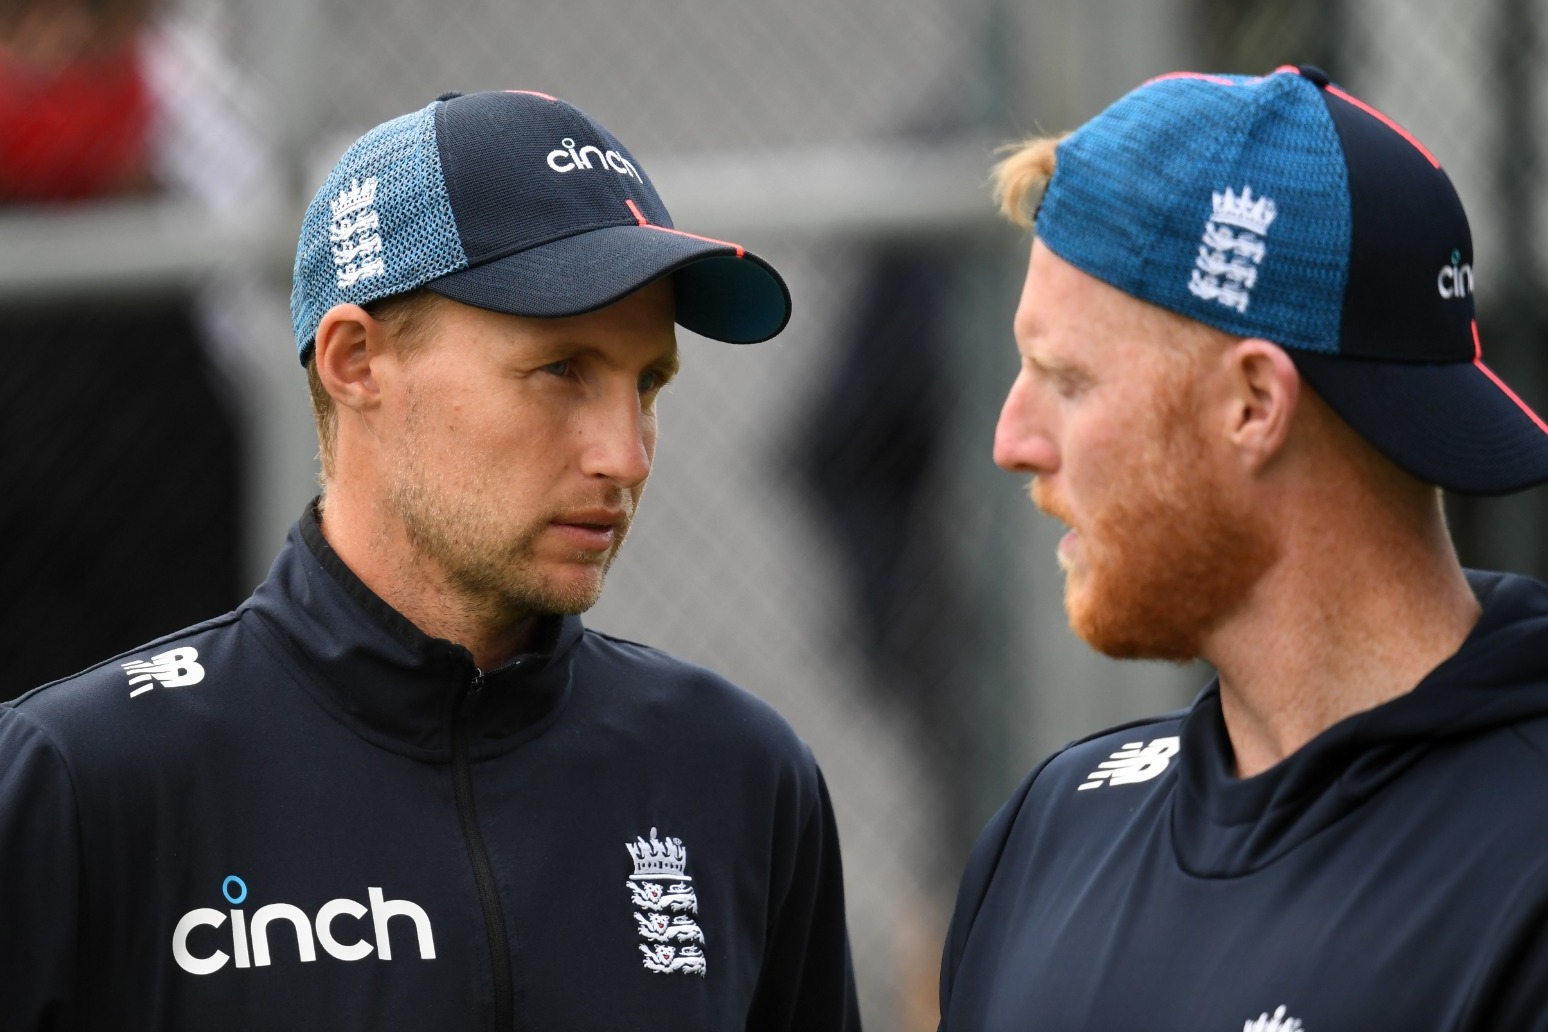 Ben Stokes in line for England Test captaincy with Rob Key set to outline vision 